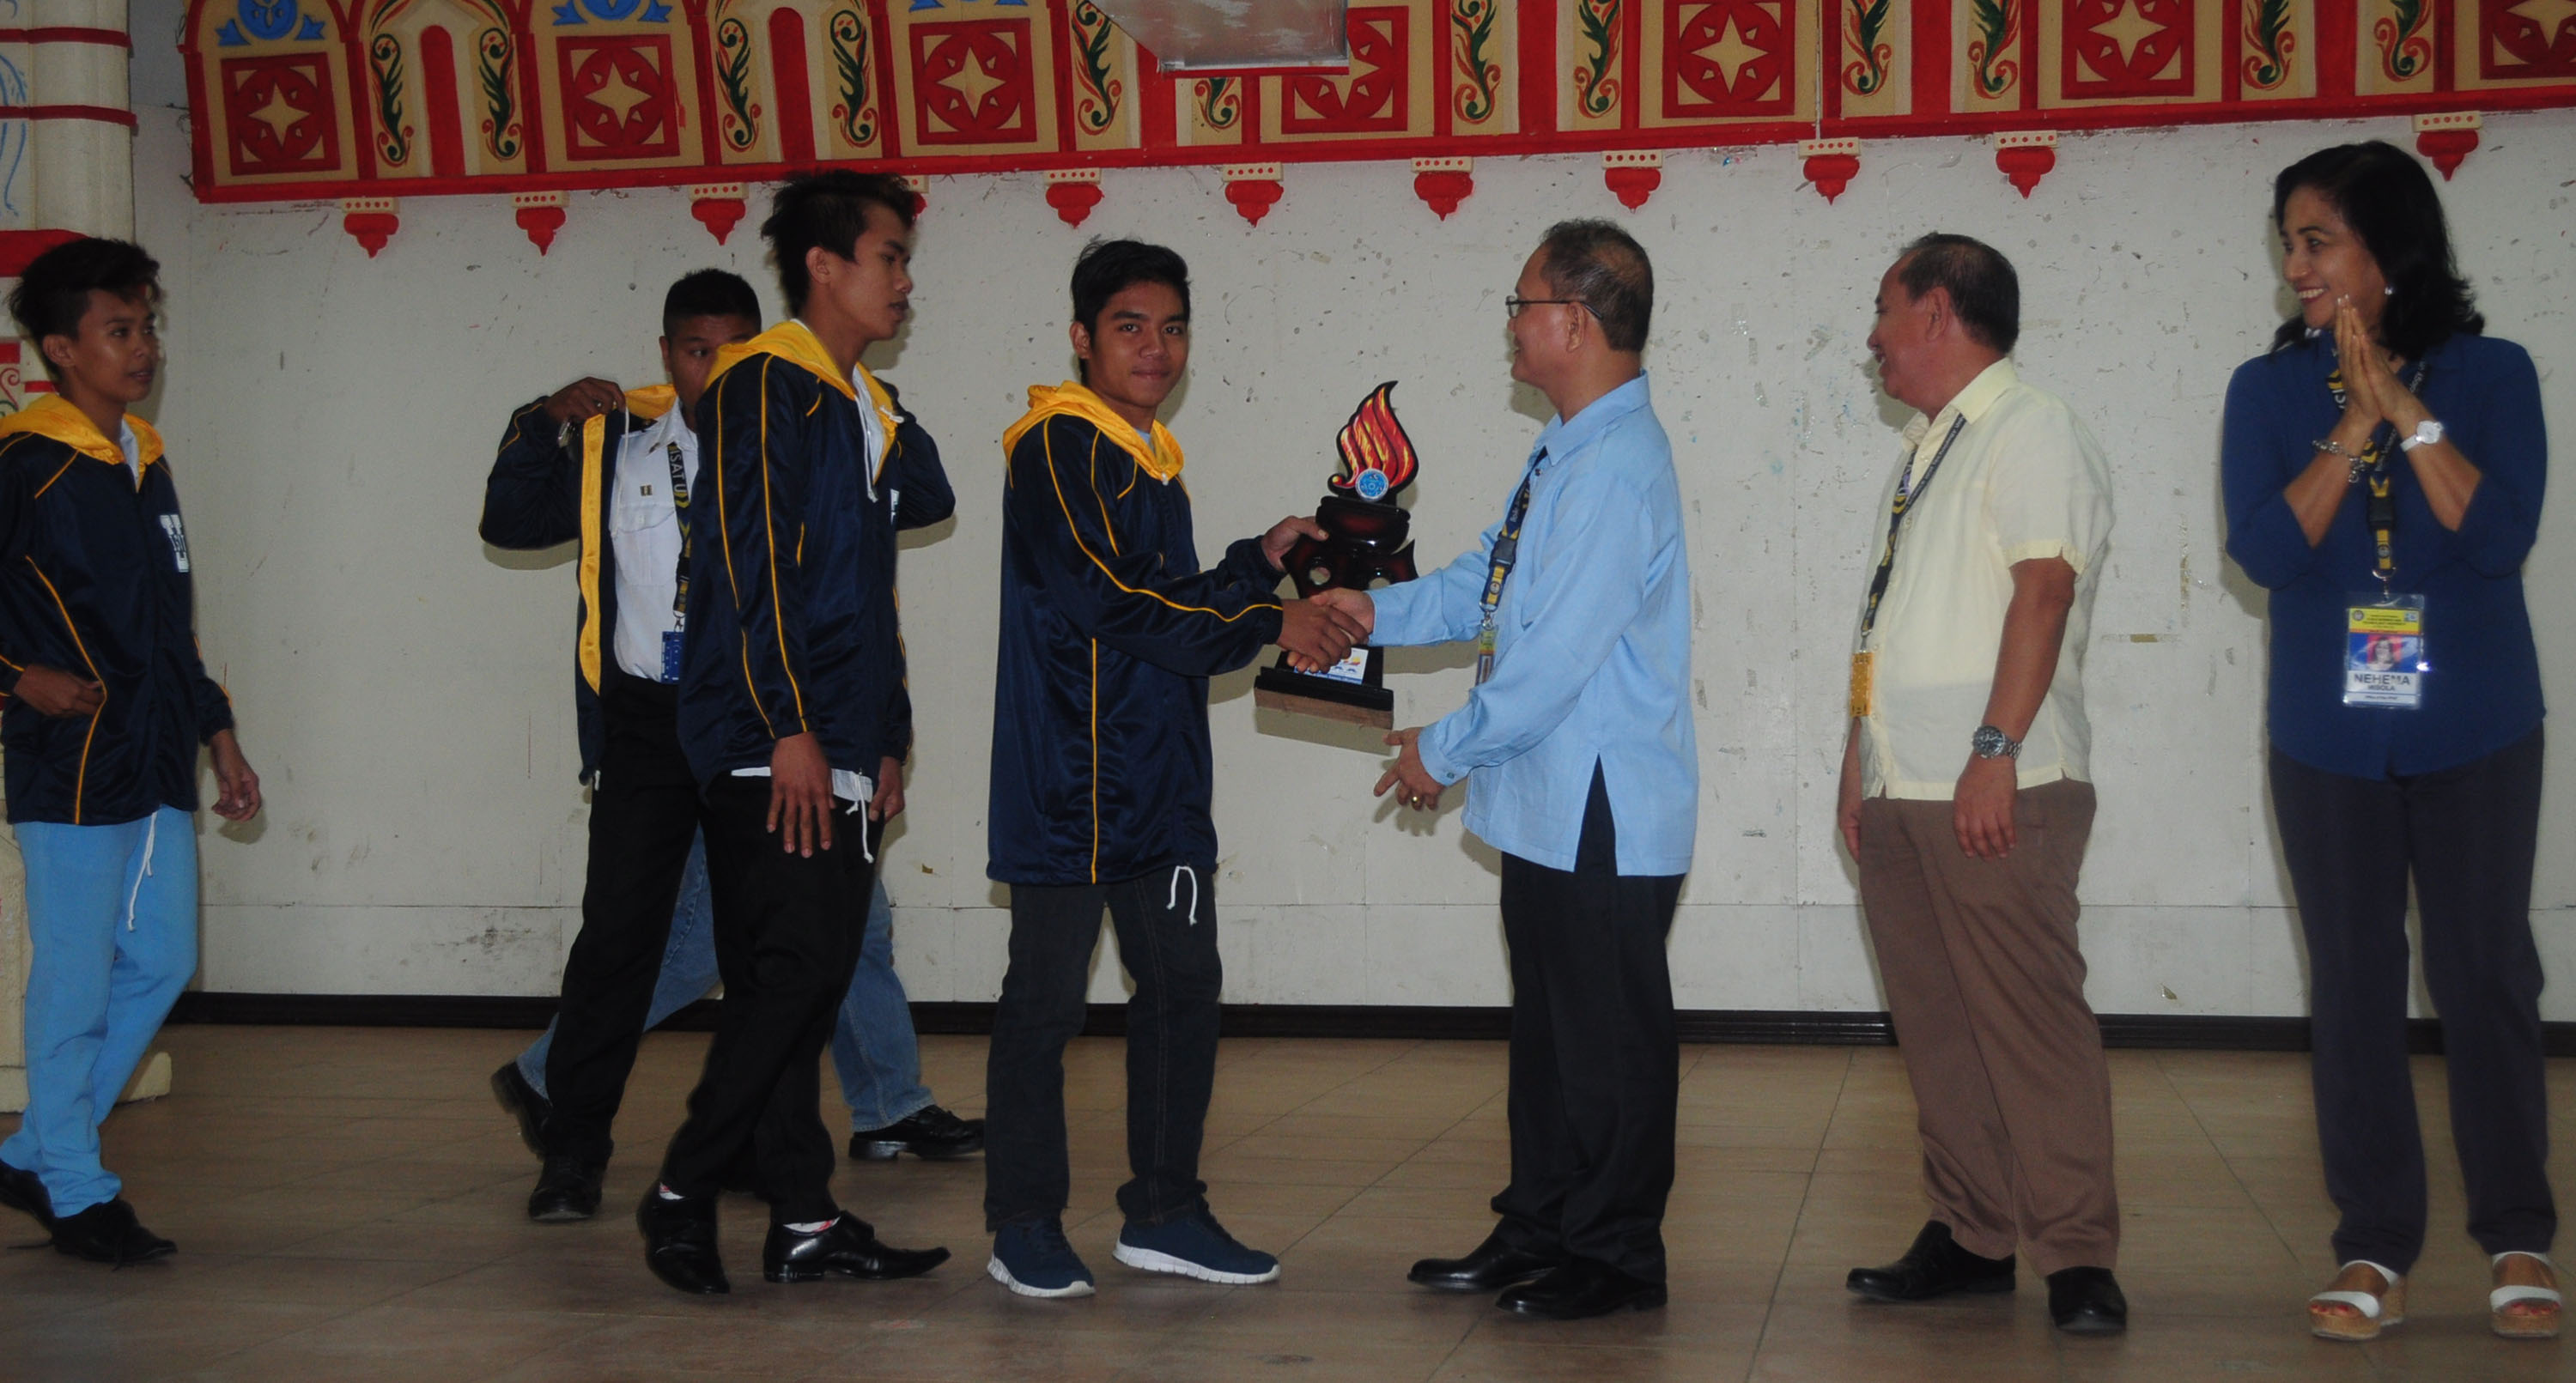 The ceremonial awarding of trophies for the winning athletes on January 9, 2017 at the Multi-purpose Educational Center.